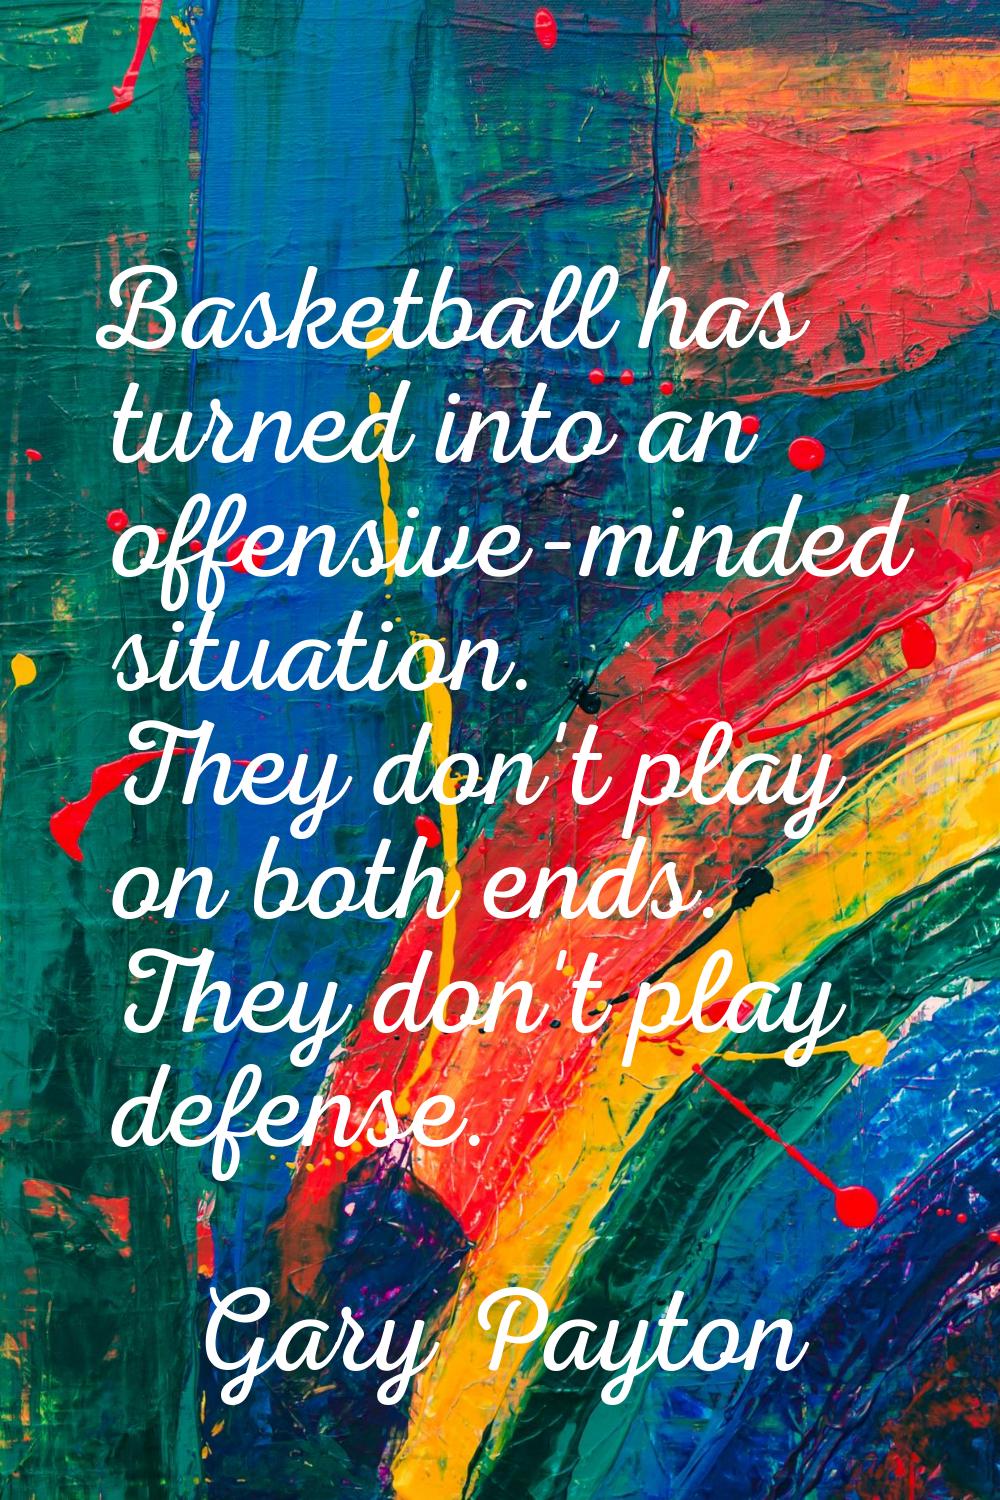 Basketball has turned into an offensive-minded situation. They don't play on both ends. They don't 